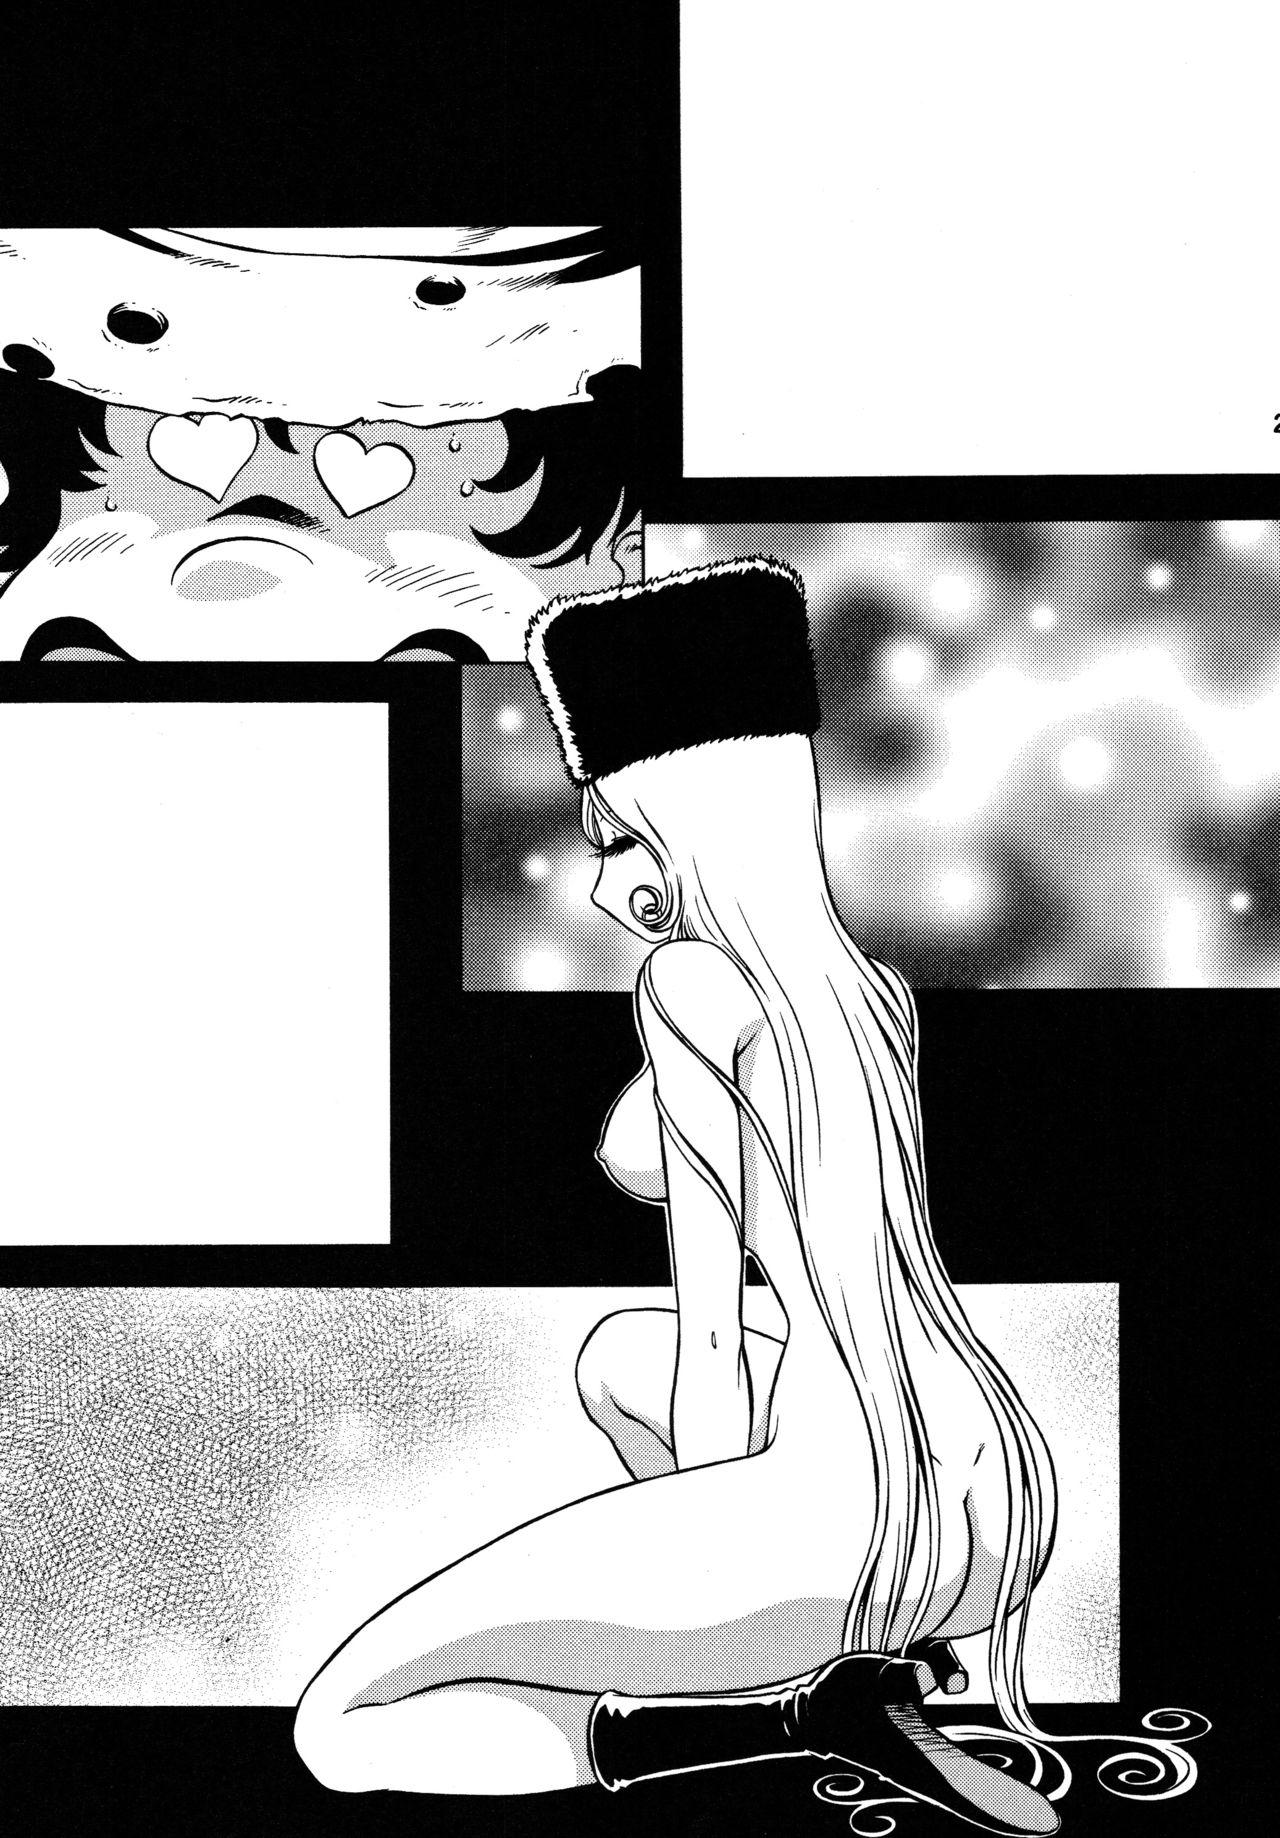 Foreskin Night Head 999 - Galaxy express 999 Amatures Gone Wild - Page 23